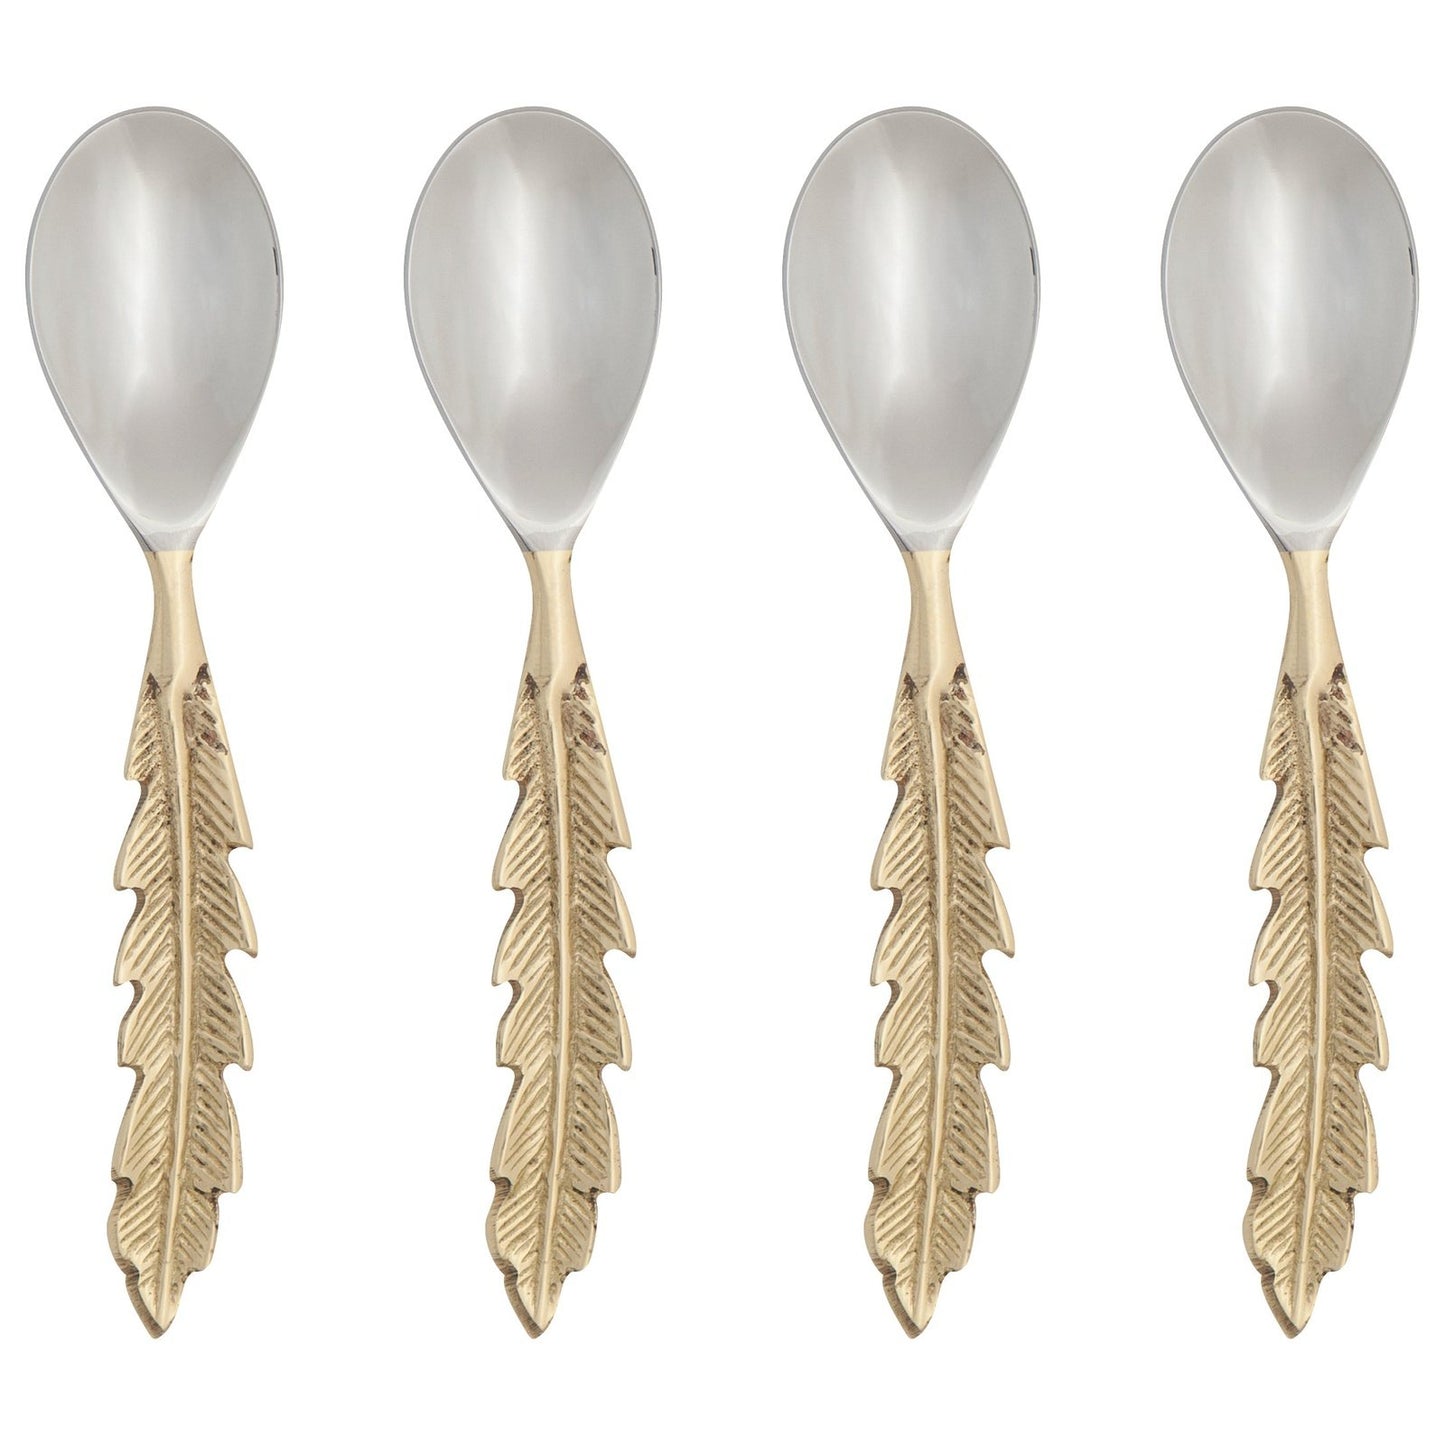 Plume Gold Spoons Set of 4